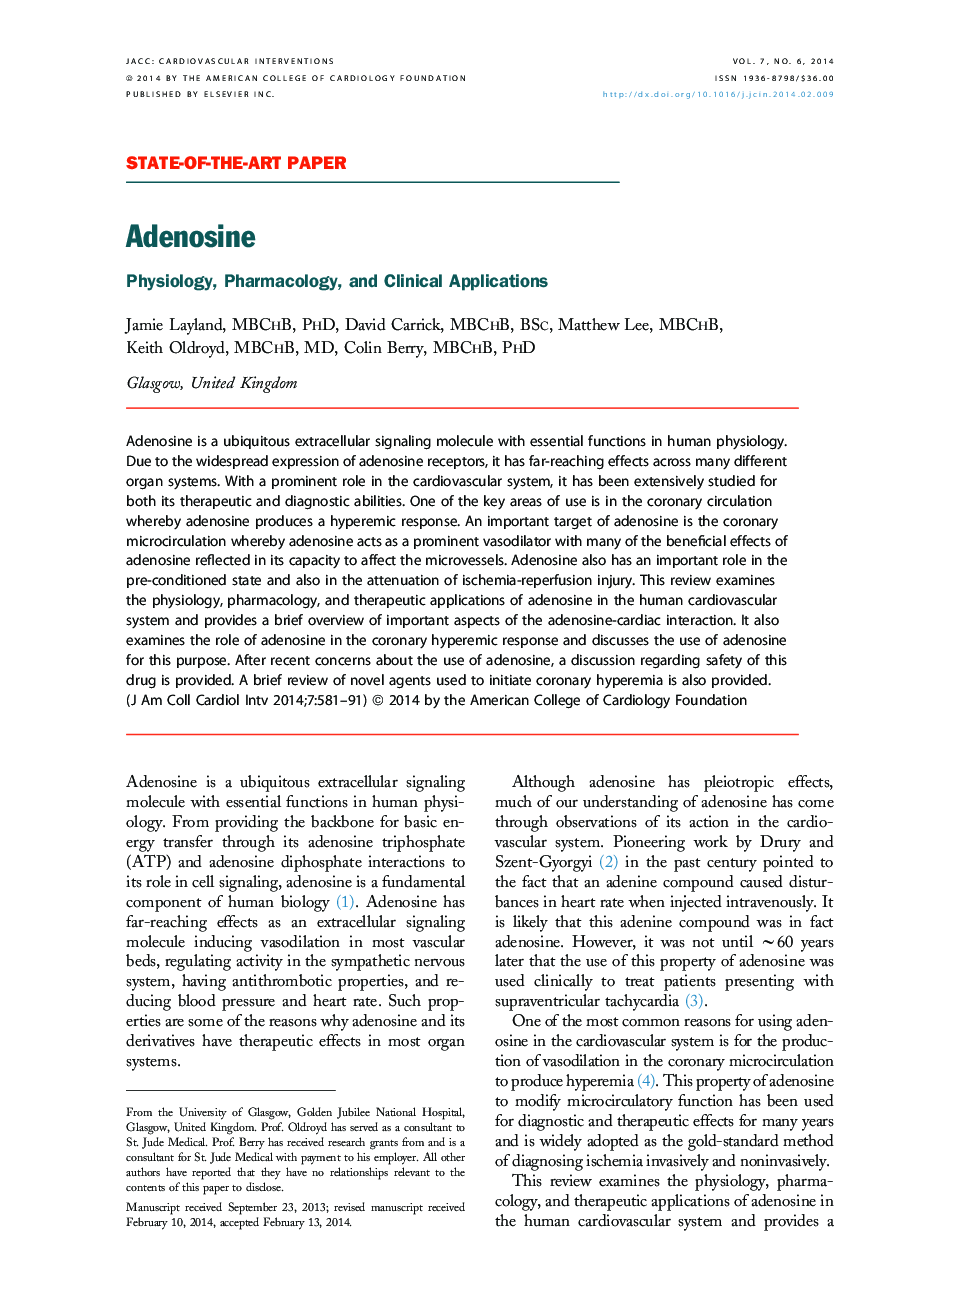 Adenosine : Physiology, Pharmacology, and Clinical Applications